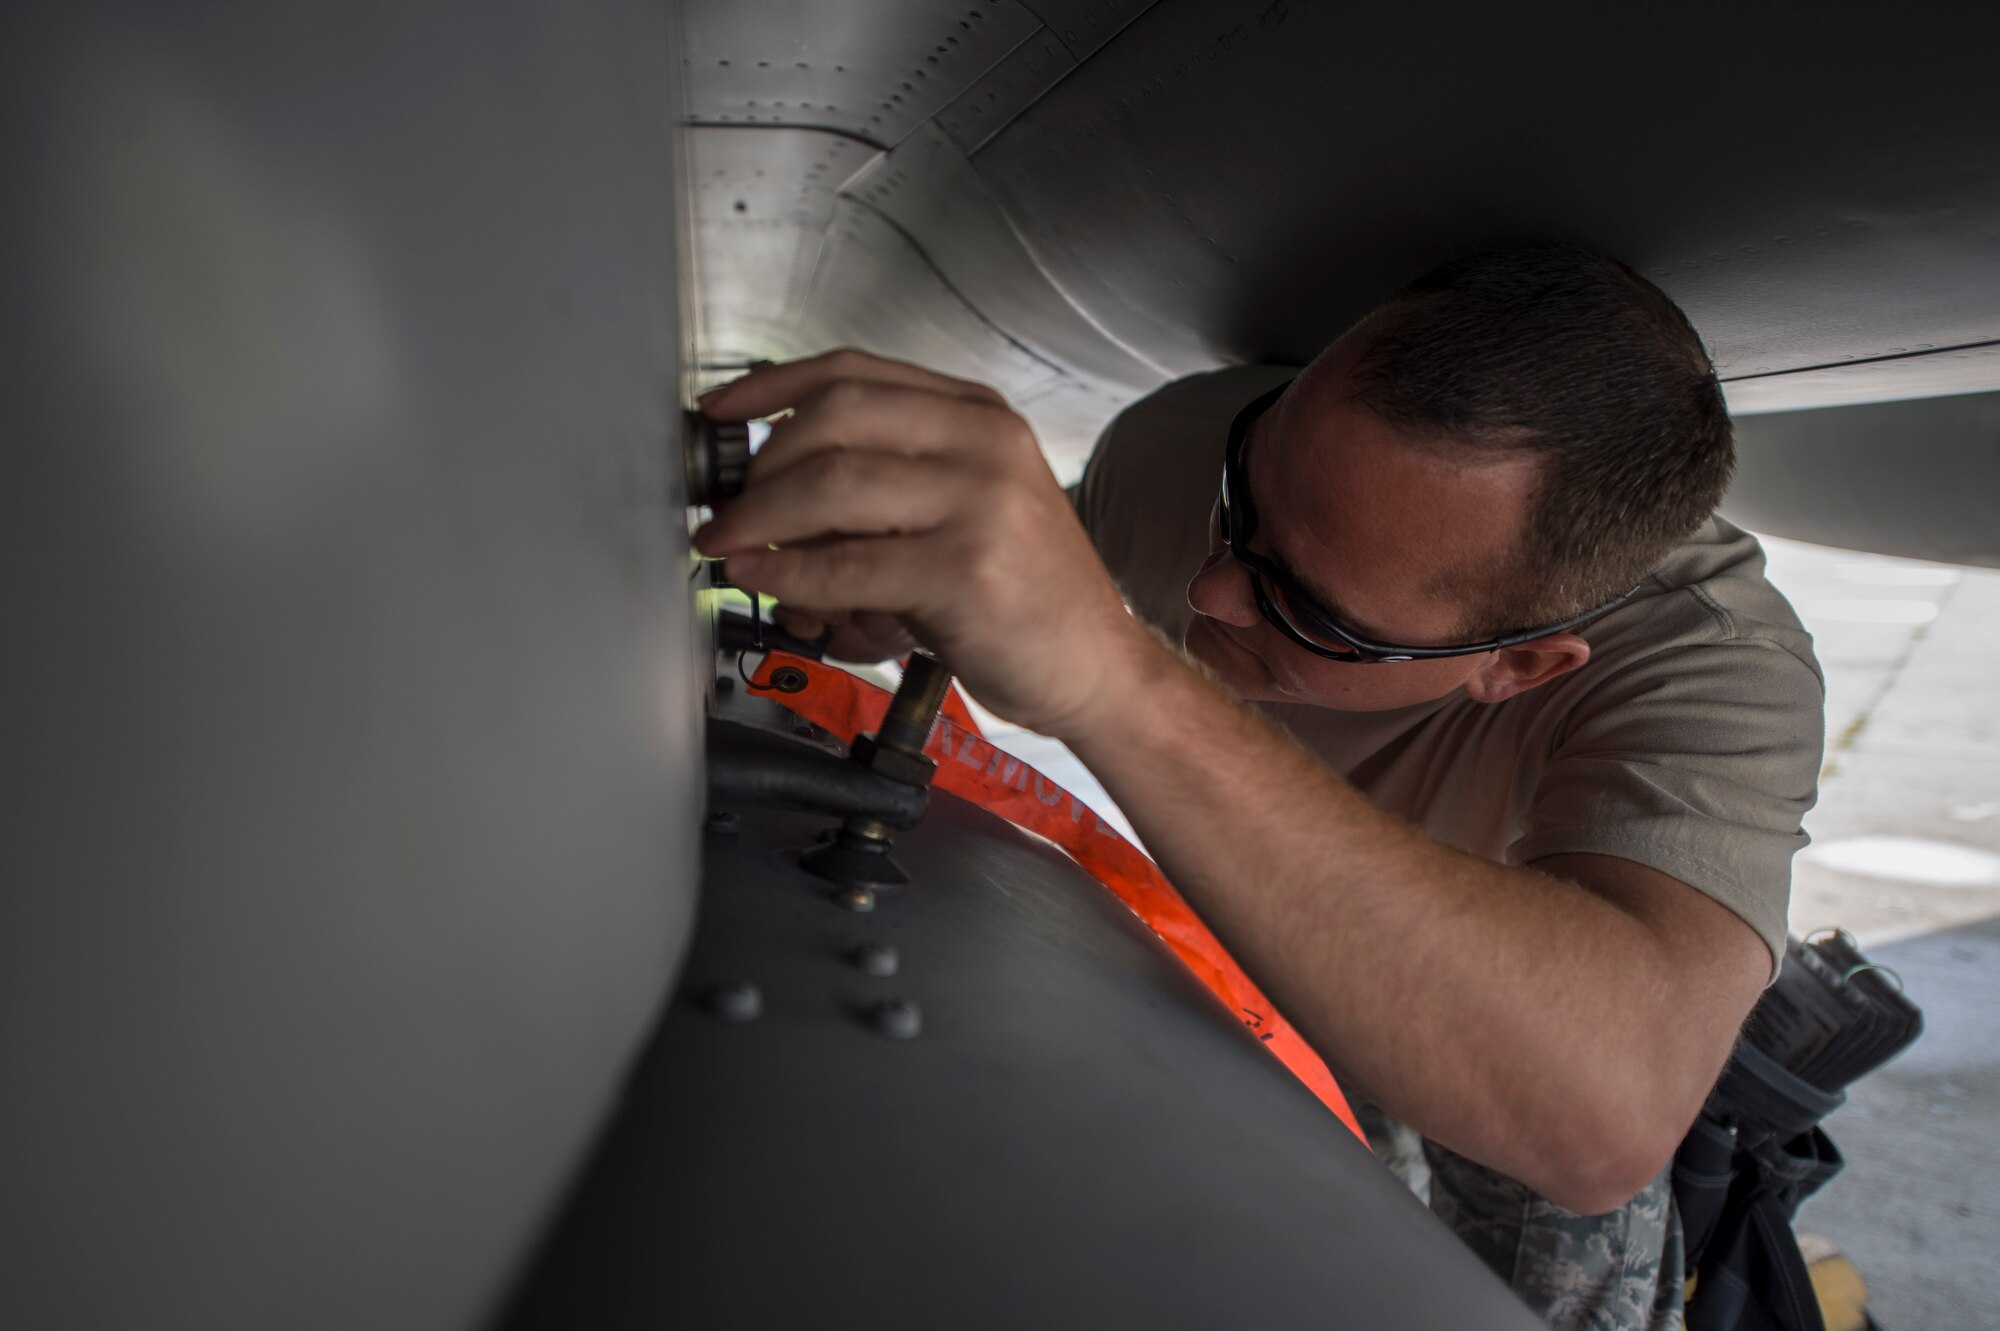 A crew chief from the 123rd Expeditionary Fighter Squadron, 142nd Fighter Wing, Oregon Air National Guard, performs pre-flight checks on an F-15C Eagle fighter aircraft during a theater security package deployment Sept. 25, 2015, at Campia Turzii, Romania. The U.S. Air Force’s forward presence in Europe allows cooperation among NATO allies and partners to develop and improve ready air forces capable of maintaining regional security. (U.S. Air Force photo by Staff Sgt. Christopher Ruano/Released)